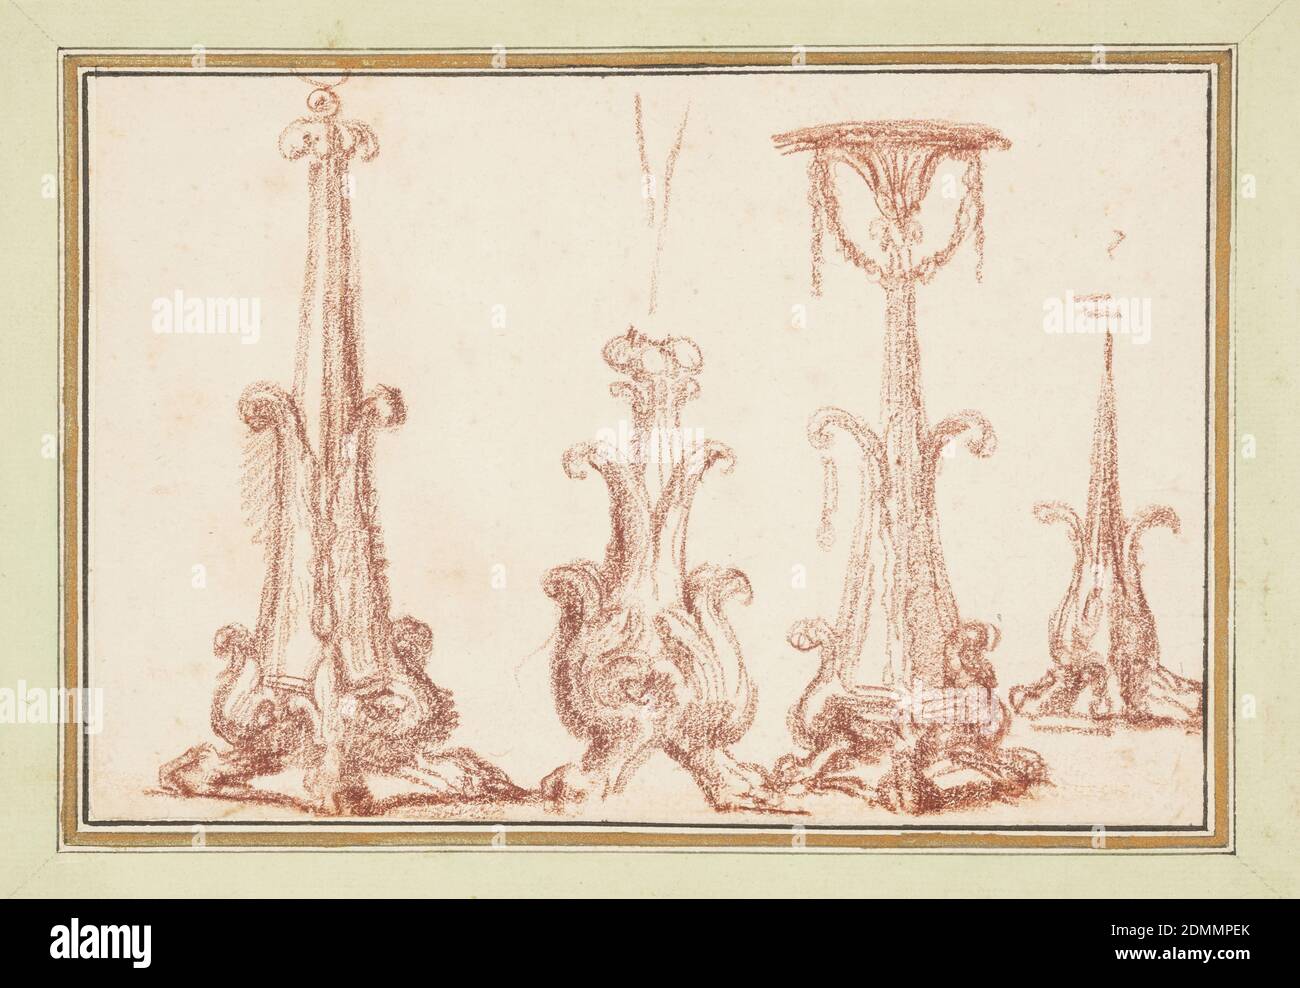 Four plant-like pedestals, Jean-Robert Ango, French, active in Rome 1759 –1770, d. 1773, Red chalk on paper, Four plant-like pedestals. All four have curly leaf-like elements and taper toward the top. The third pedestal widens again at the top from which a garland is suspended., France, ca. 1759–70, ornament, Drawing Stock Photo